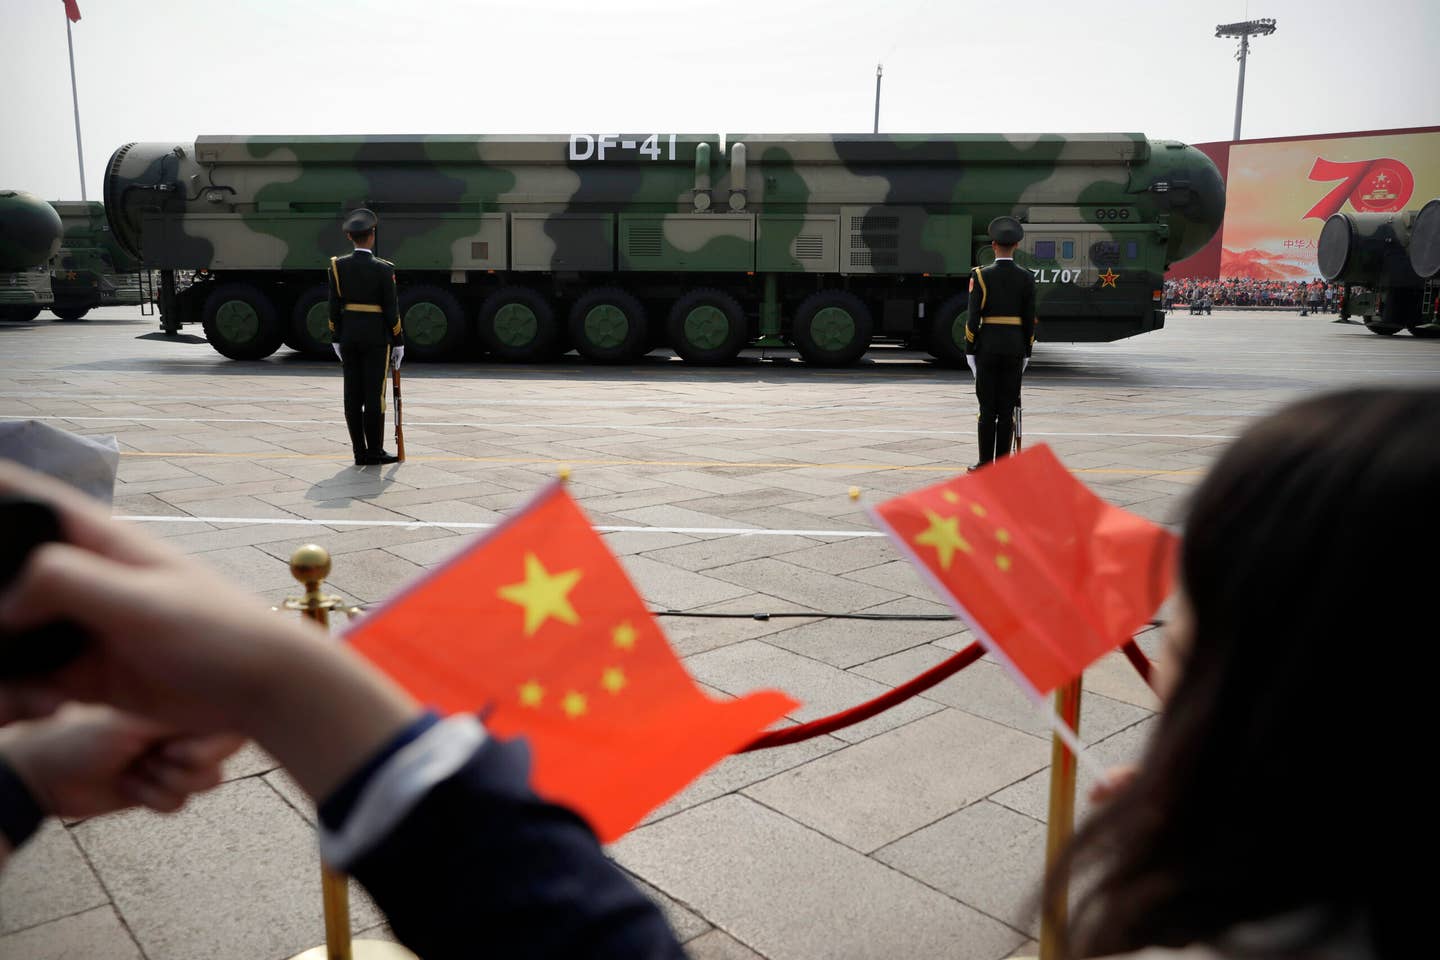 Spectators wave Chinese flags as military vehicles carrying DF-41 ICBMs roll during a parade to commemorate the 70th anniversary of the founding of Communist China in Beijing on Oct. 1, 2019. <em>Credit: AP Photo/Mark Schiefelbein</em>